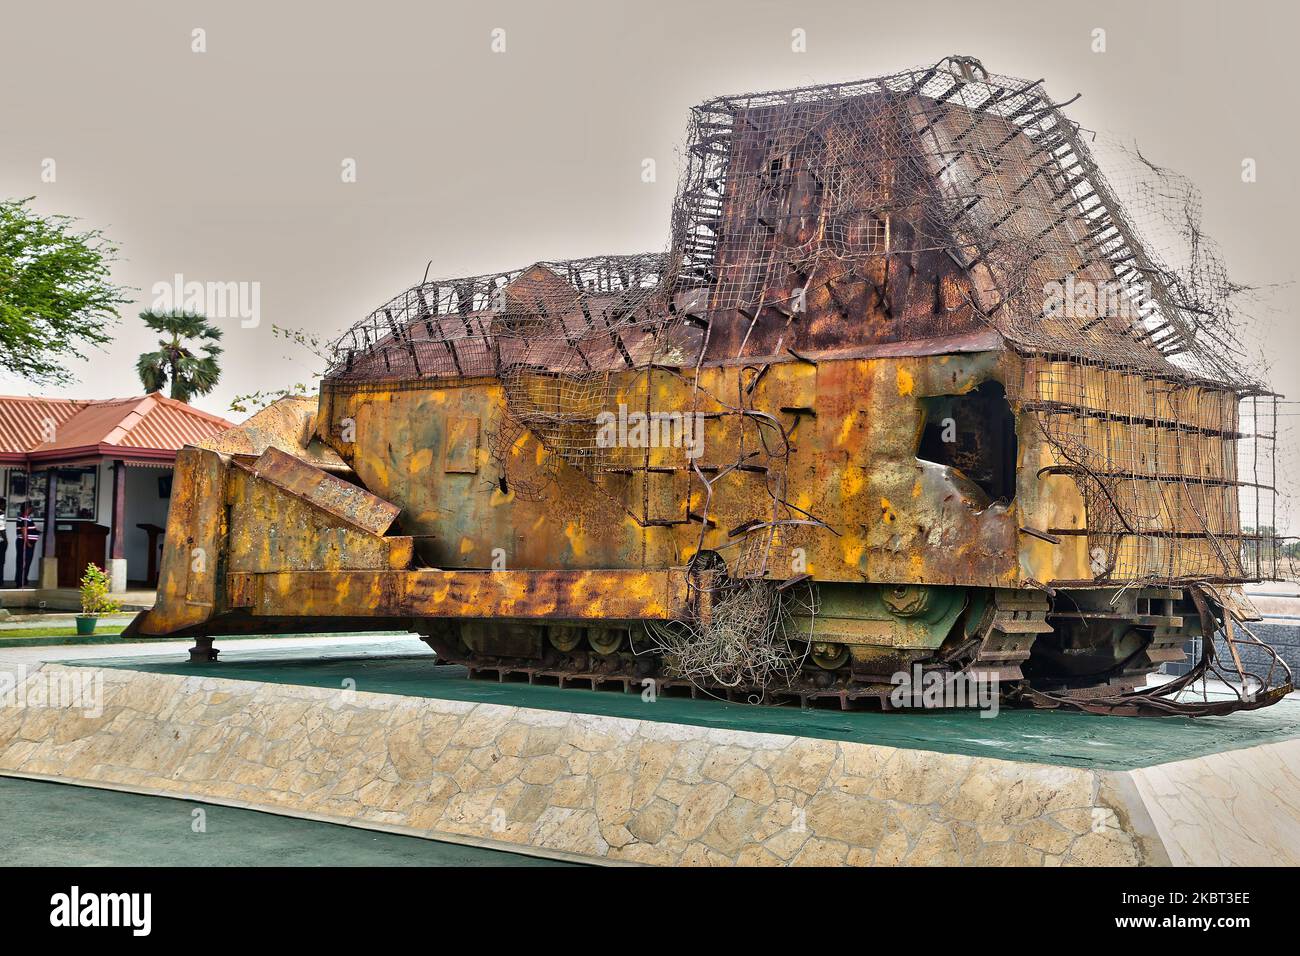 The remains of the improvised armored bulldozer (that was used in place of a battle tank) belonging to the Liberation Tigers of Tamil Eelam (LTTE) during the First Battle of Elephant Pass located at the Elephant Pass, Northern Province, Sri Lanka on August 10, 2017. The bulldozer is part of the Hasalaka War Hero War Memorial (Hasalaka Gamini War Memorial) which honors Corporal Gamini Kularatne of 6 Sri Lanka Sinha Regiment (SLSR) who was killed on 14 July 1991 while preventing the bulldozer from ramming into the Elephant Pass Army garrison. Corporal Kularatne used two hand grenades to kill the Stock Photo